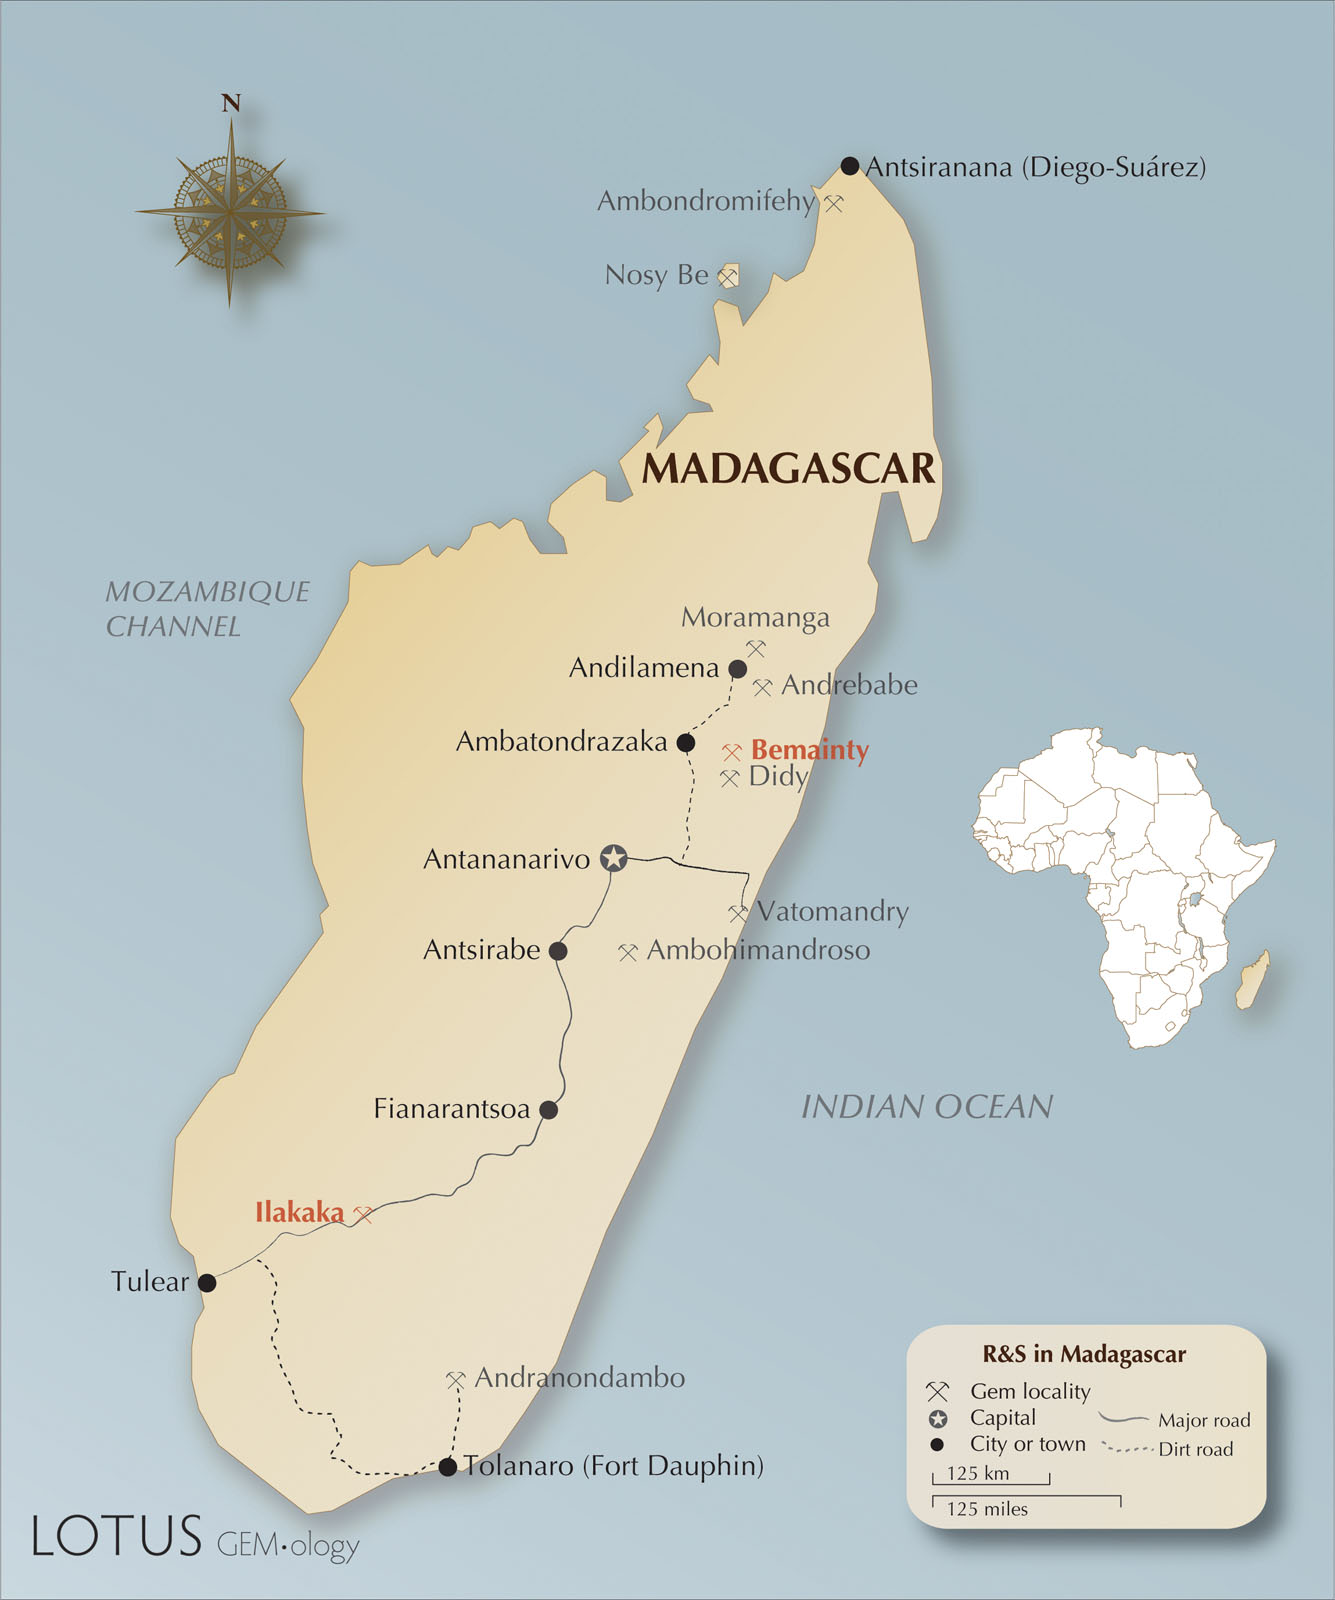  Map of Madagascar, including the most notable corundum localities. Ilakaka, Bemainty, and Andranondambo, the sources of samples used in this experiment, are highlighted in red. Maps by Richard Hughes.